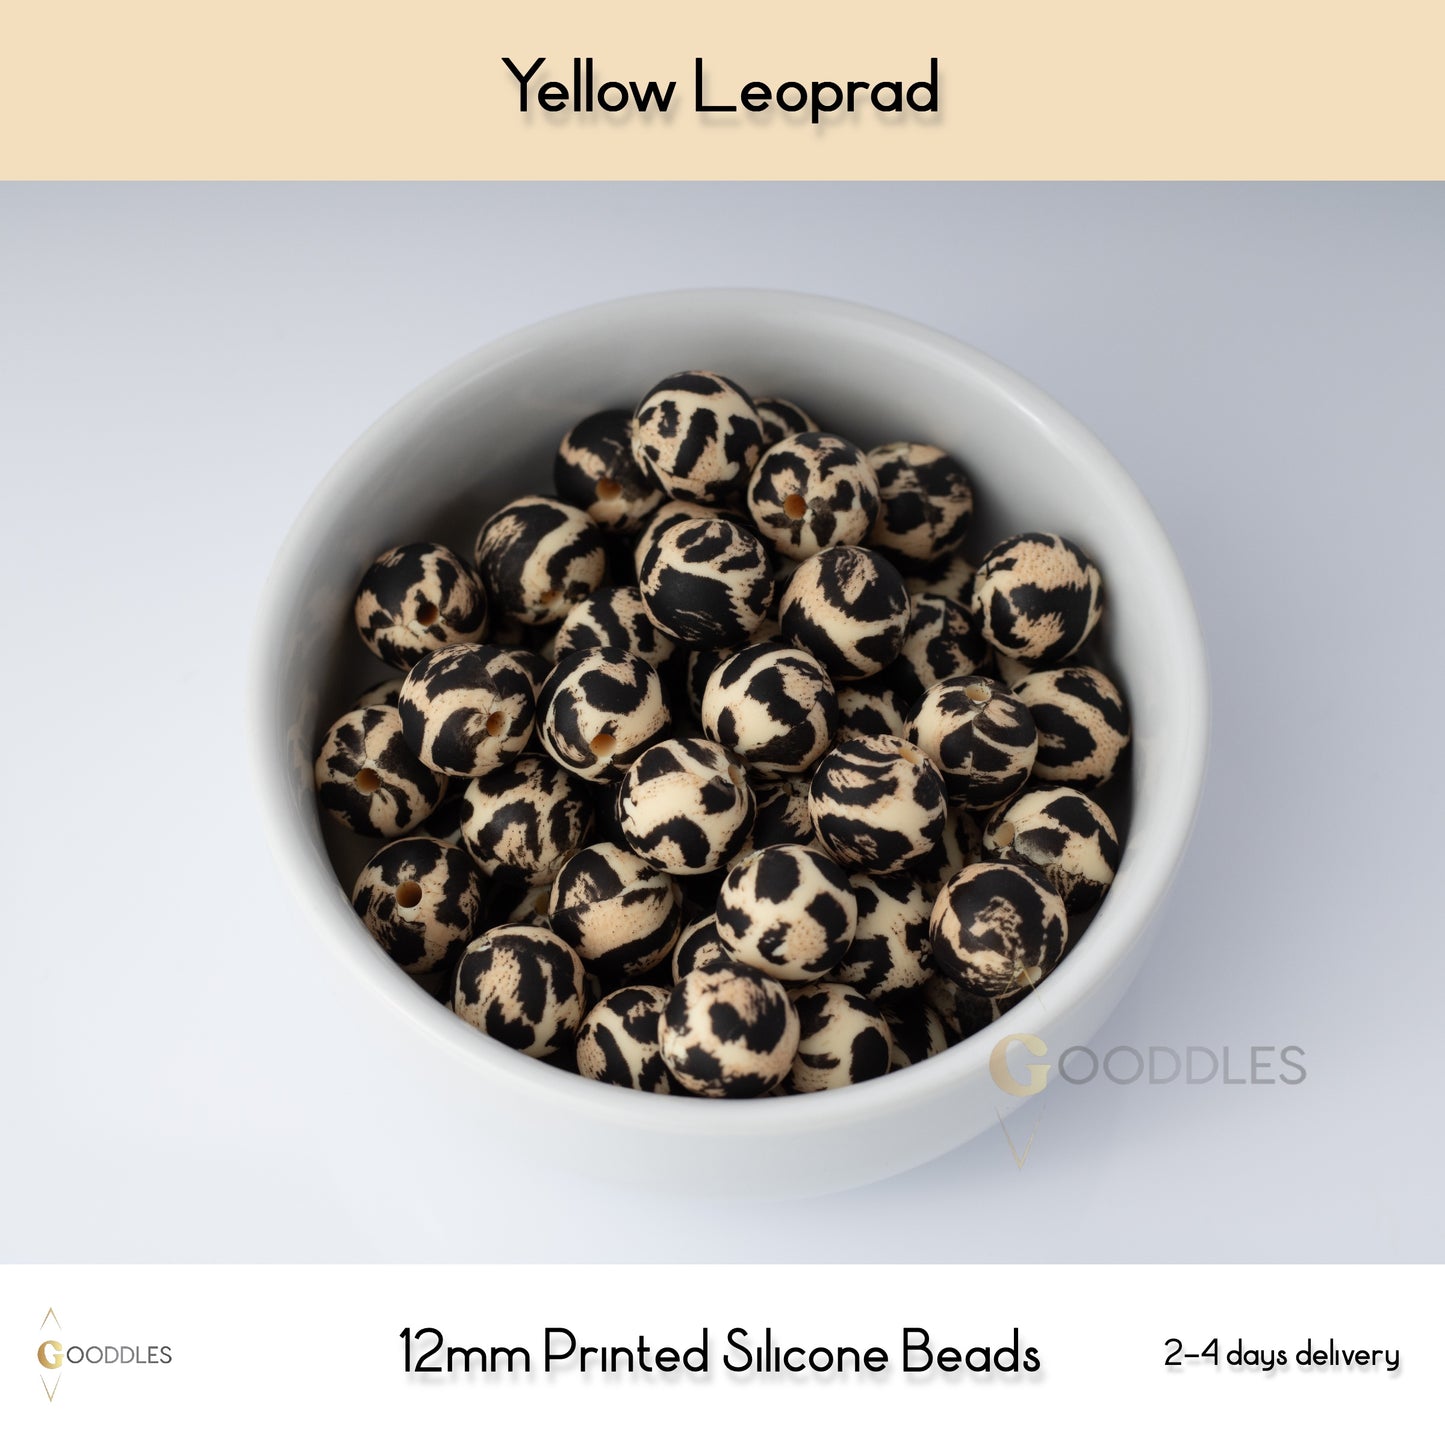 5pcs, Yellow Leopard Silicone Beads Printed Round Silicone Beads